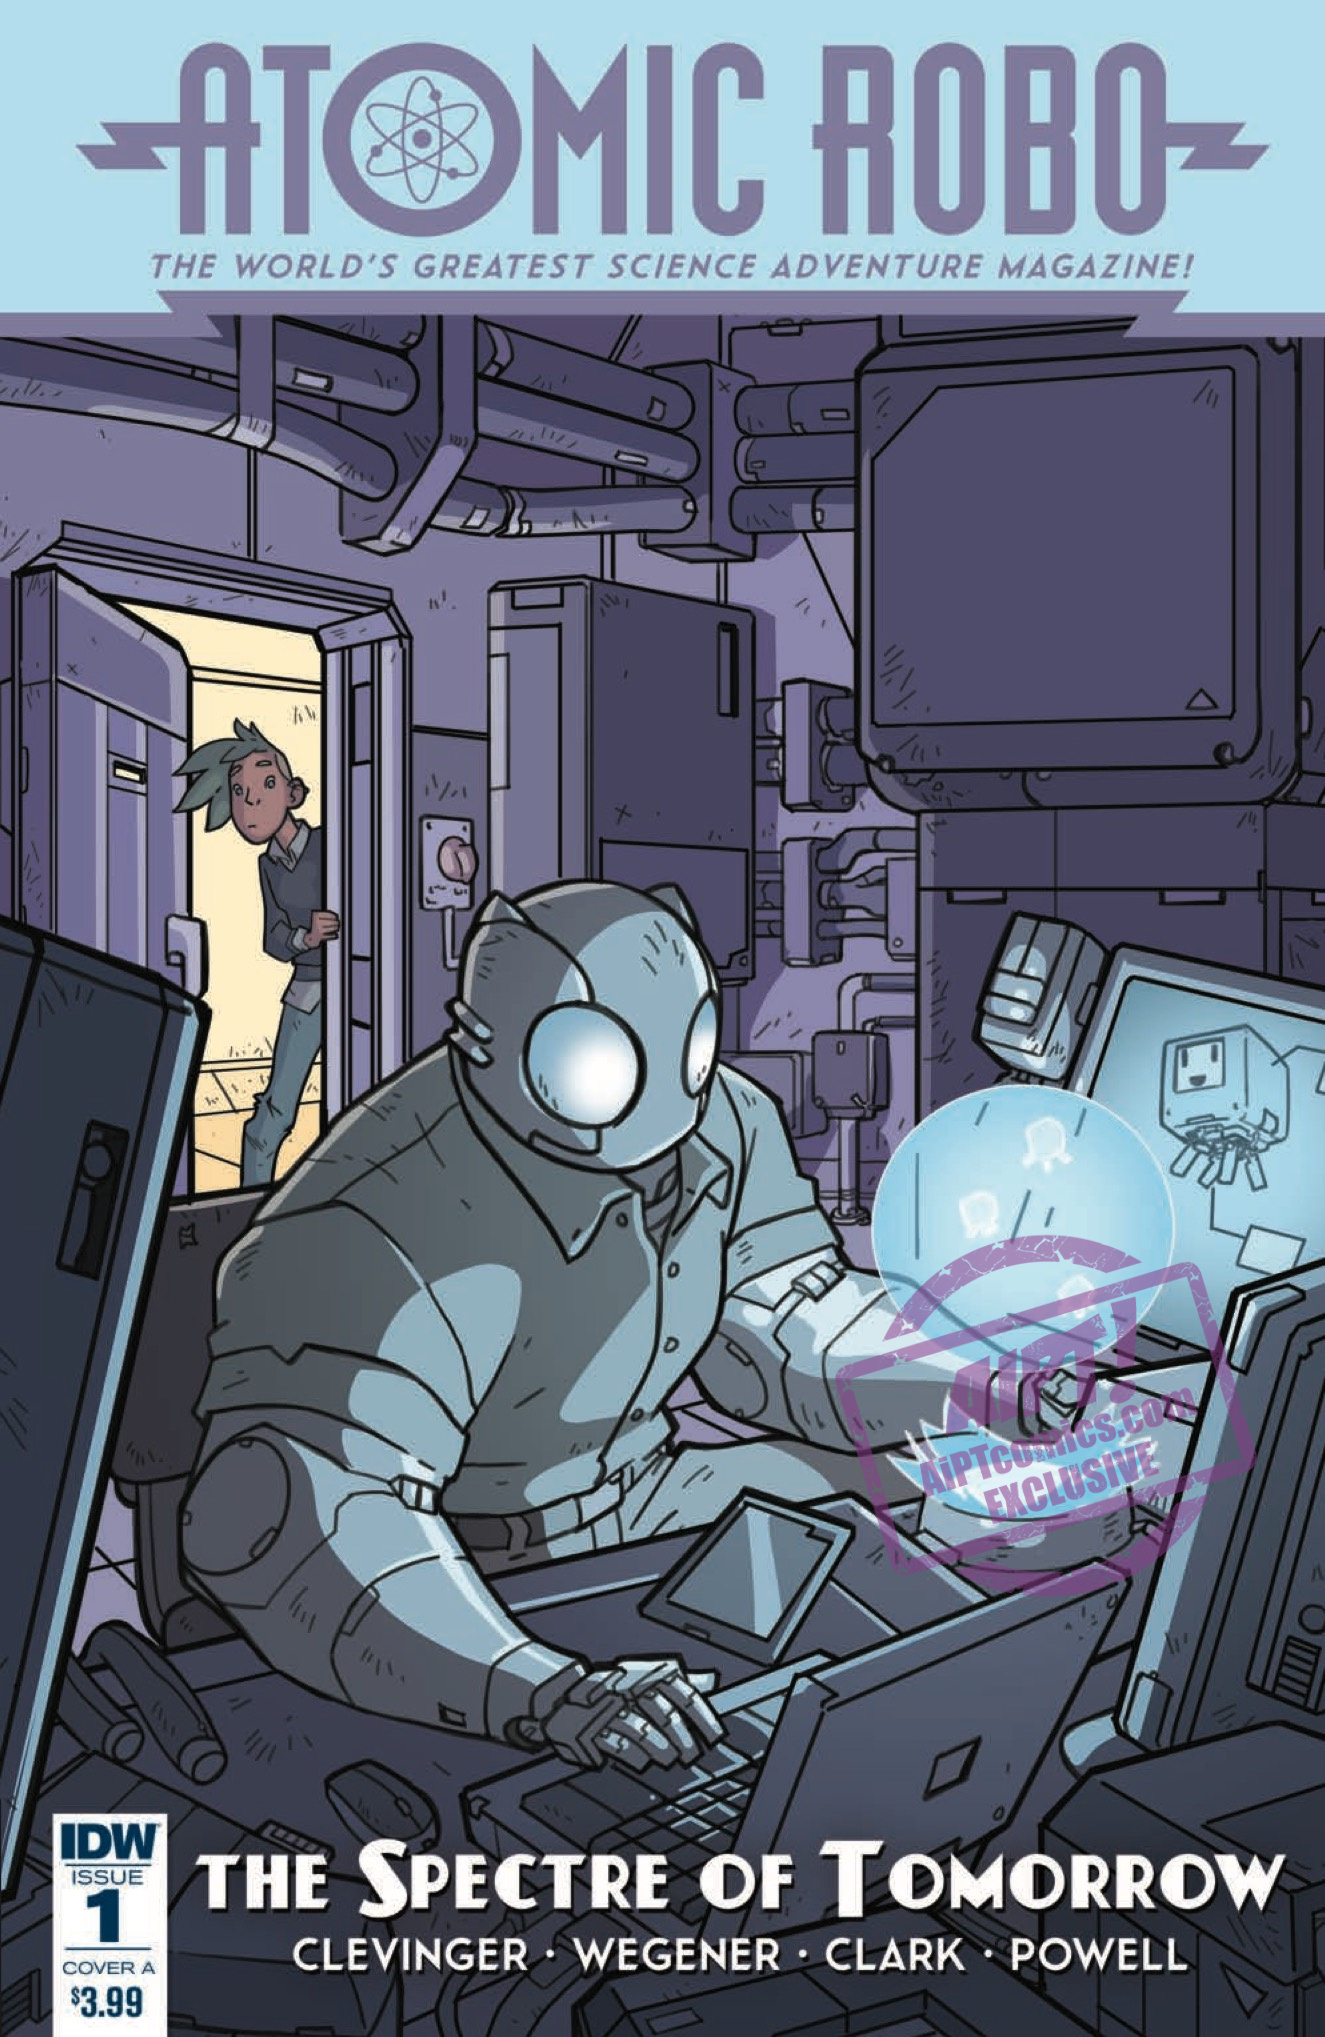 [EXCLUSIVE] IDW Preview: Atomic Robo and the Spectre of Tomorrow #1